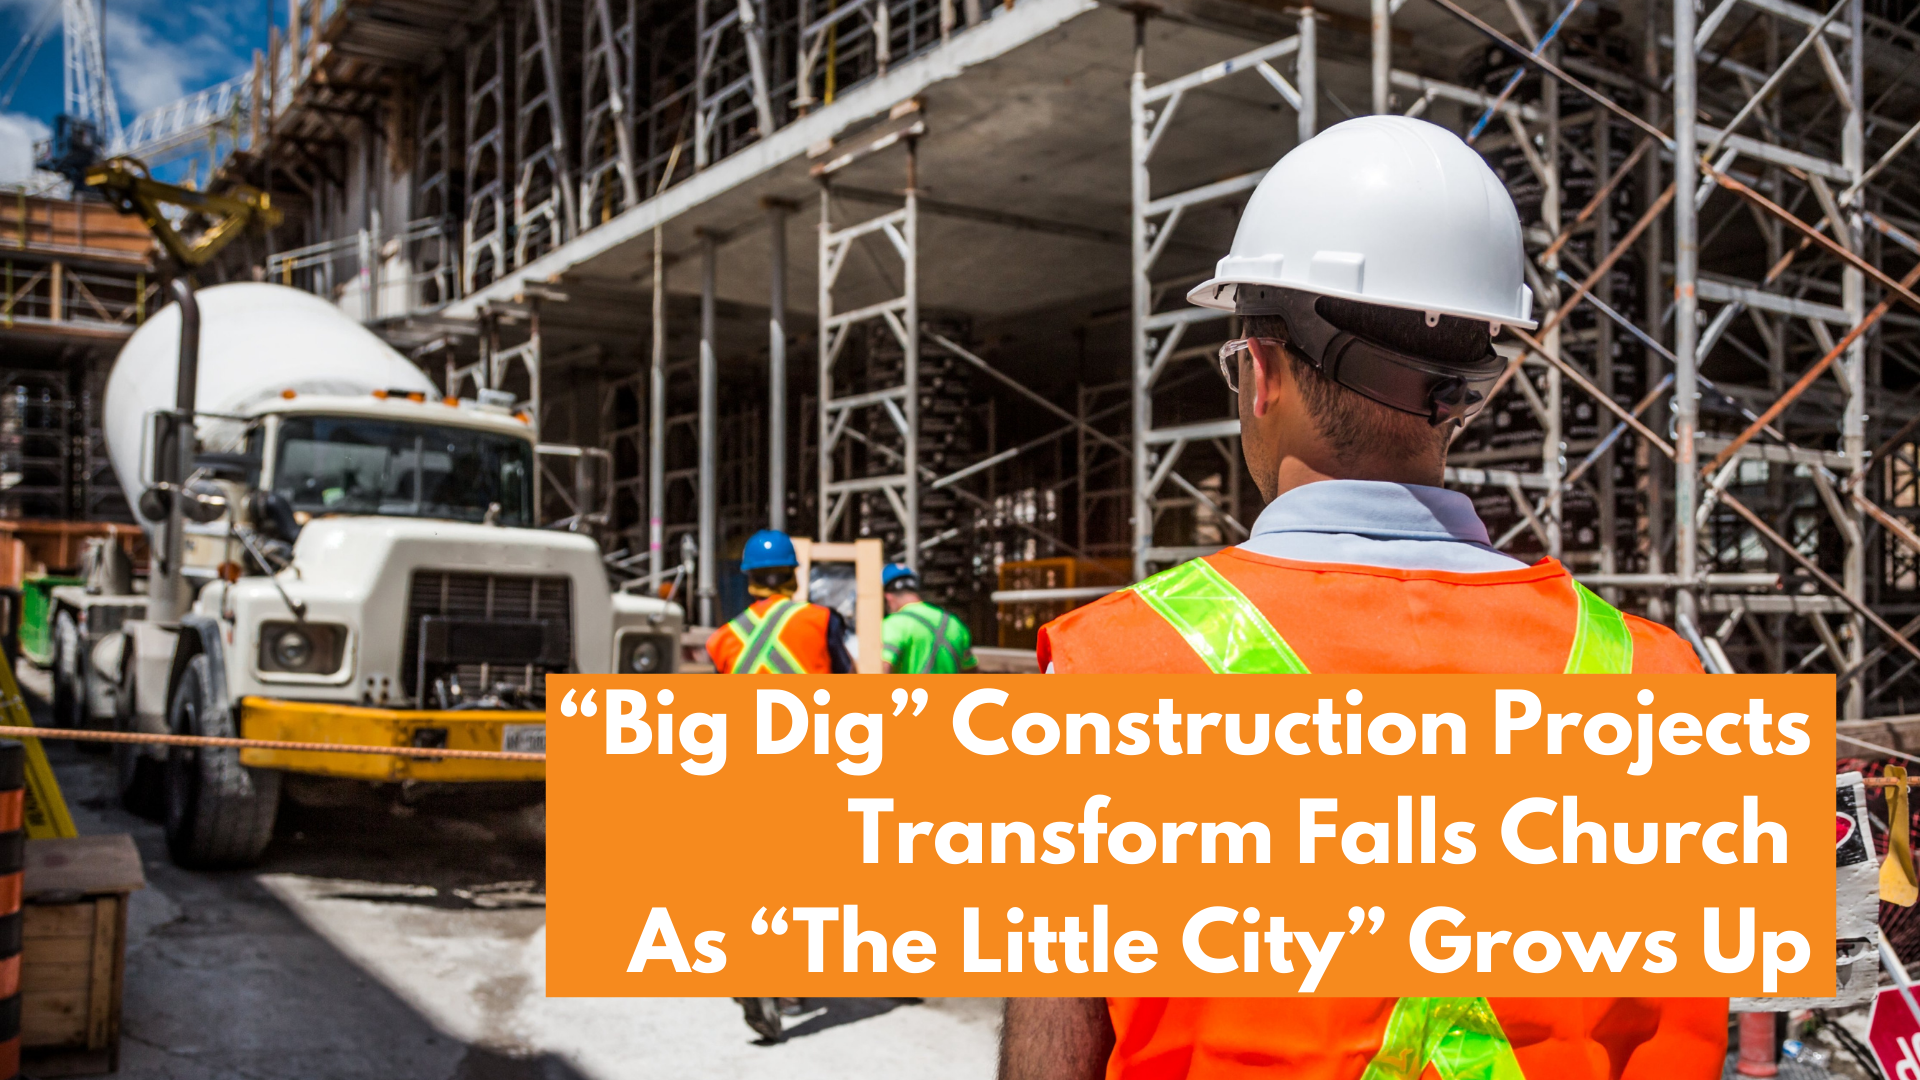 “Big Dig” Construction Projects Transform Falls Church As “The Little City” Grows Up (1)